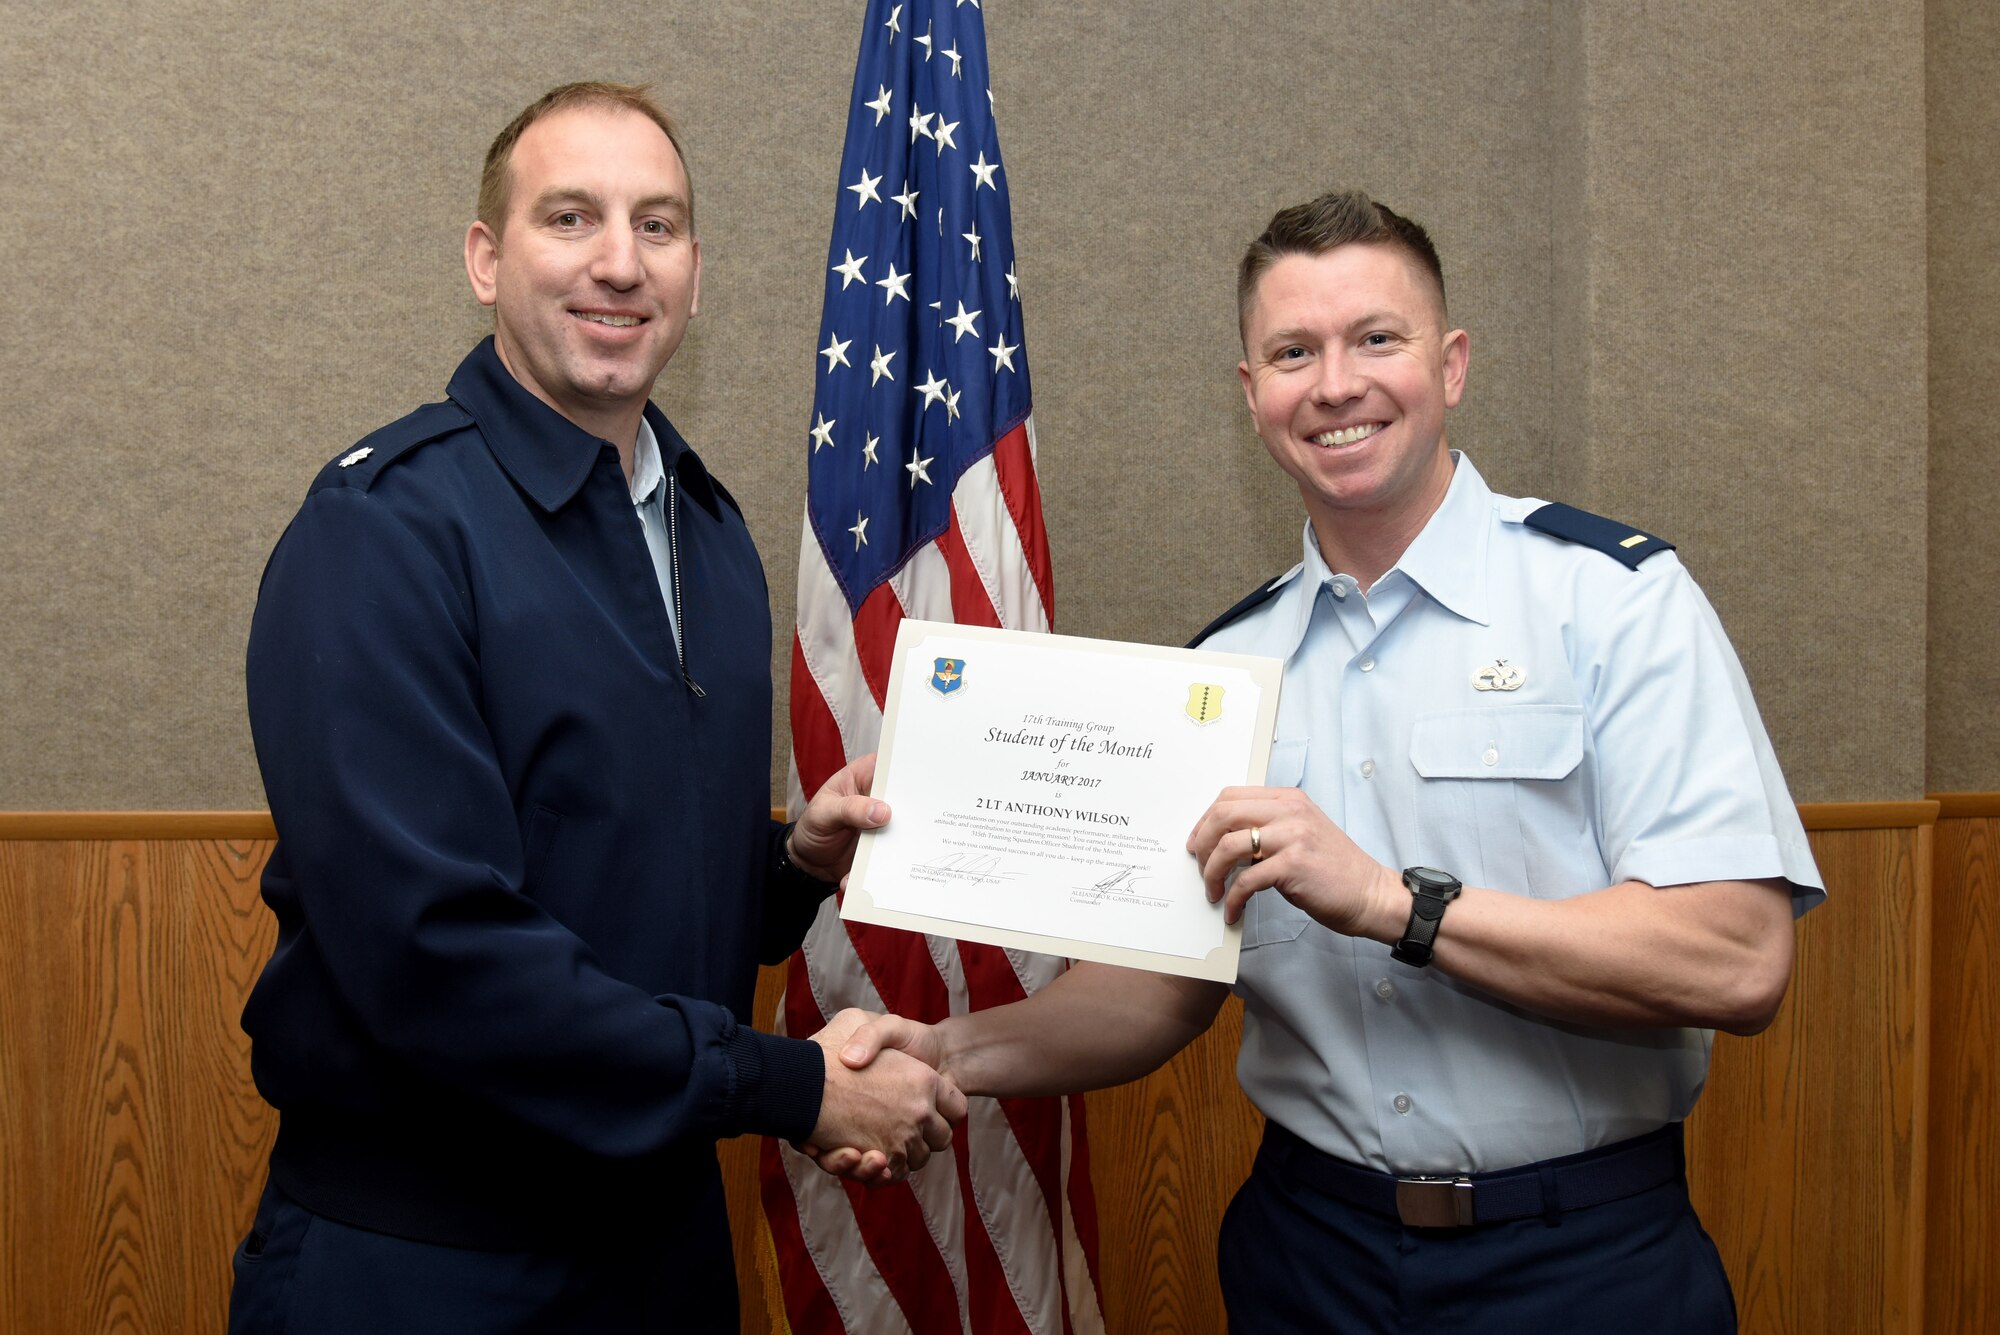 U.S. Air Force Lt. Col. Jason Kulchar, 315th Training Squadron director of operations, presents the 315th Officer Training Squadron Student of the Month award for January 2017 to 2nd Lt. Anthony Wilson, 315th TRS student, in the Brandenburg Hall on Goodfellow Air Force Base, Texas, Feb. 3, 2017. (U.S. Air Force photo by Staff Sgt. Joshua Edwards/Released)